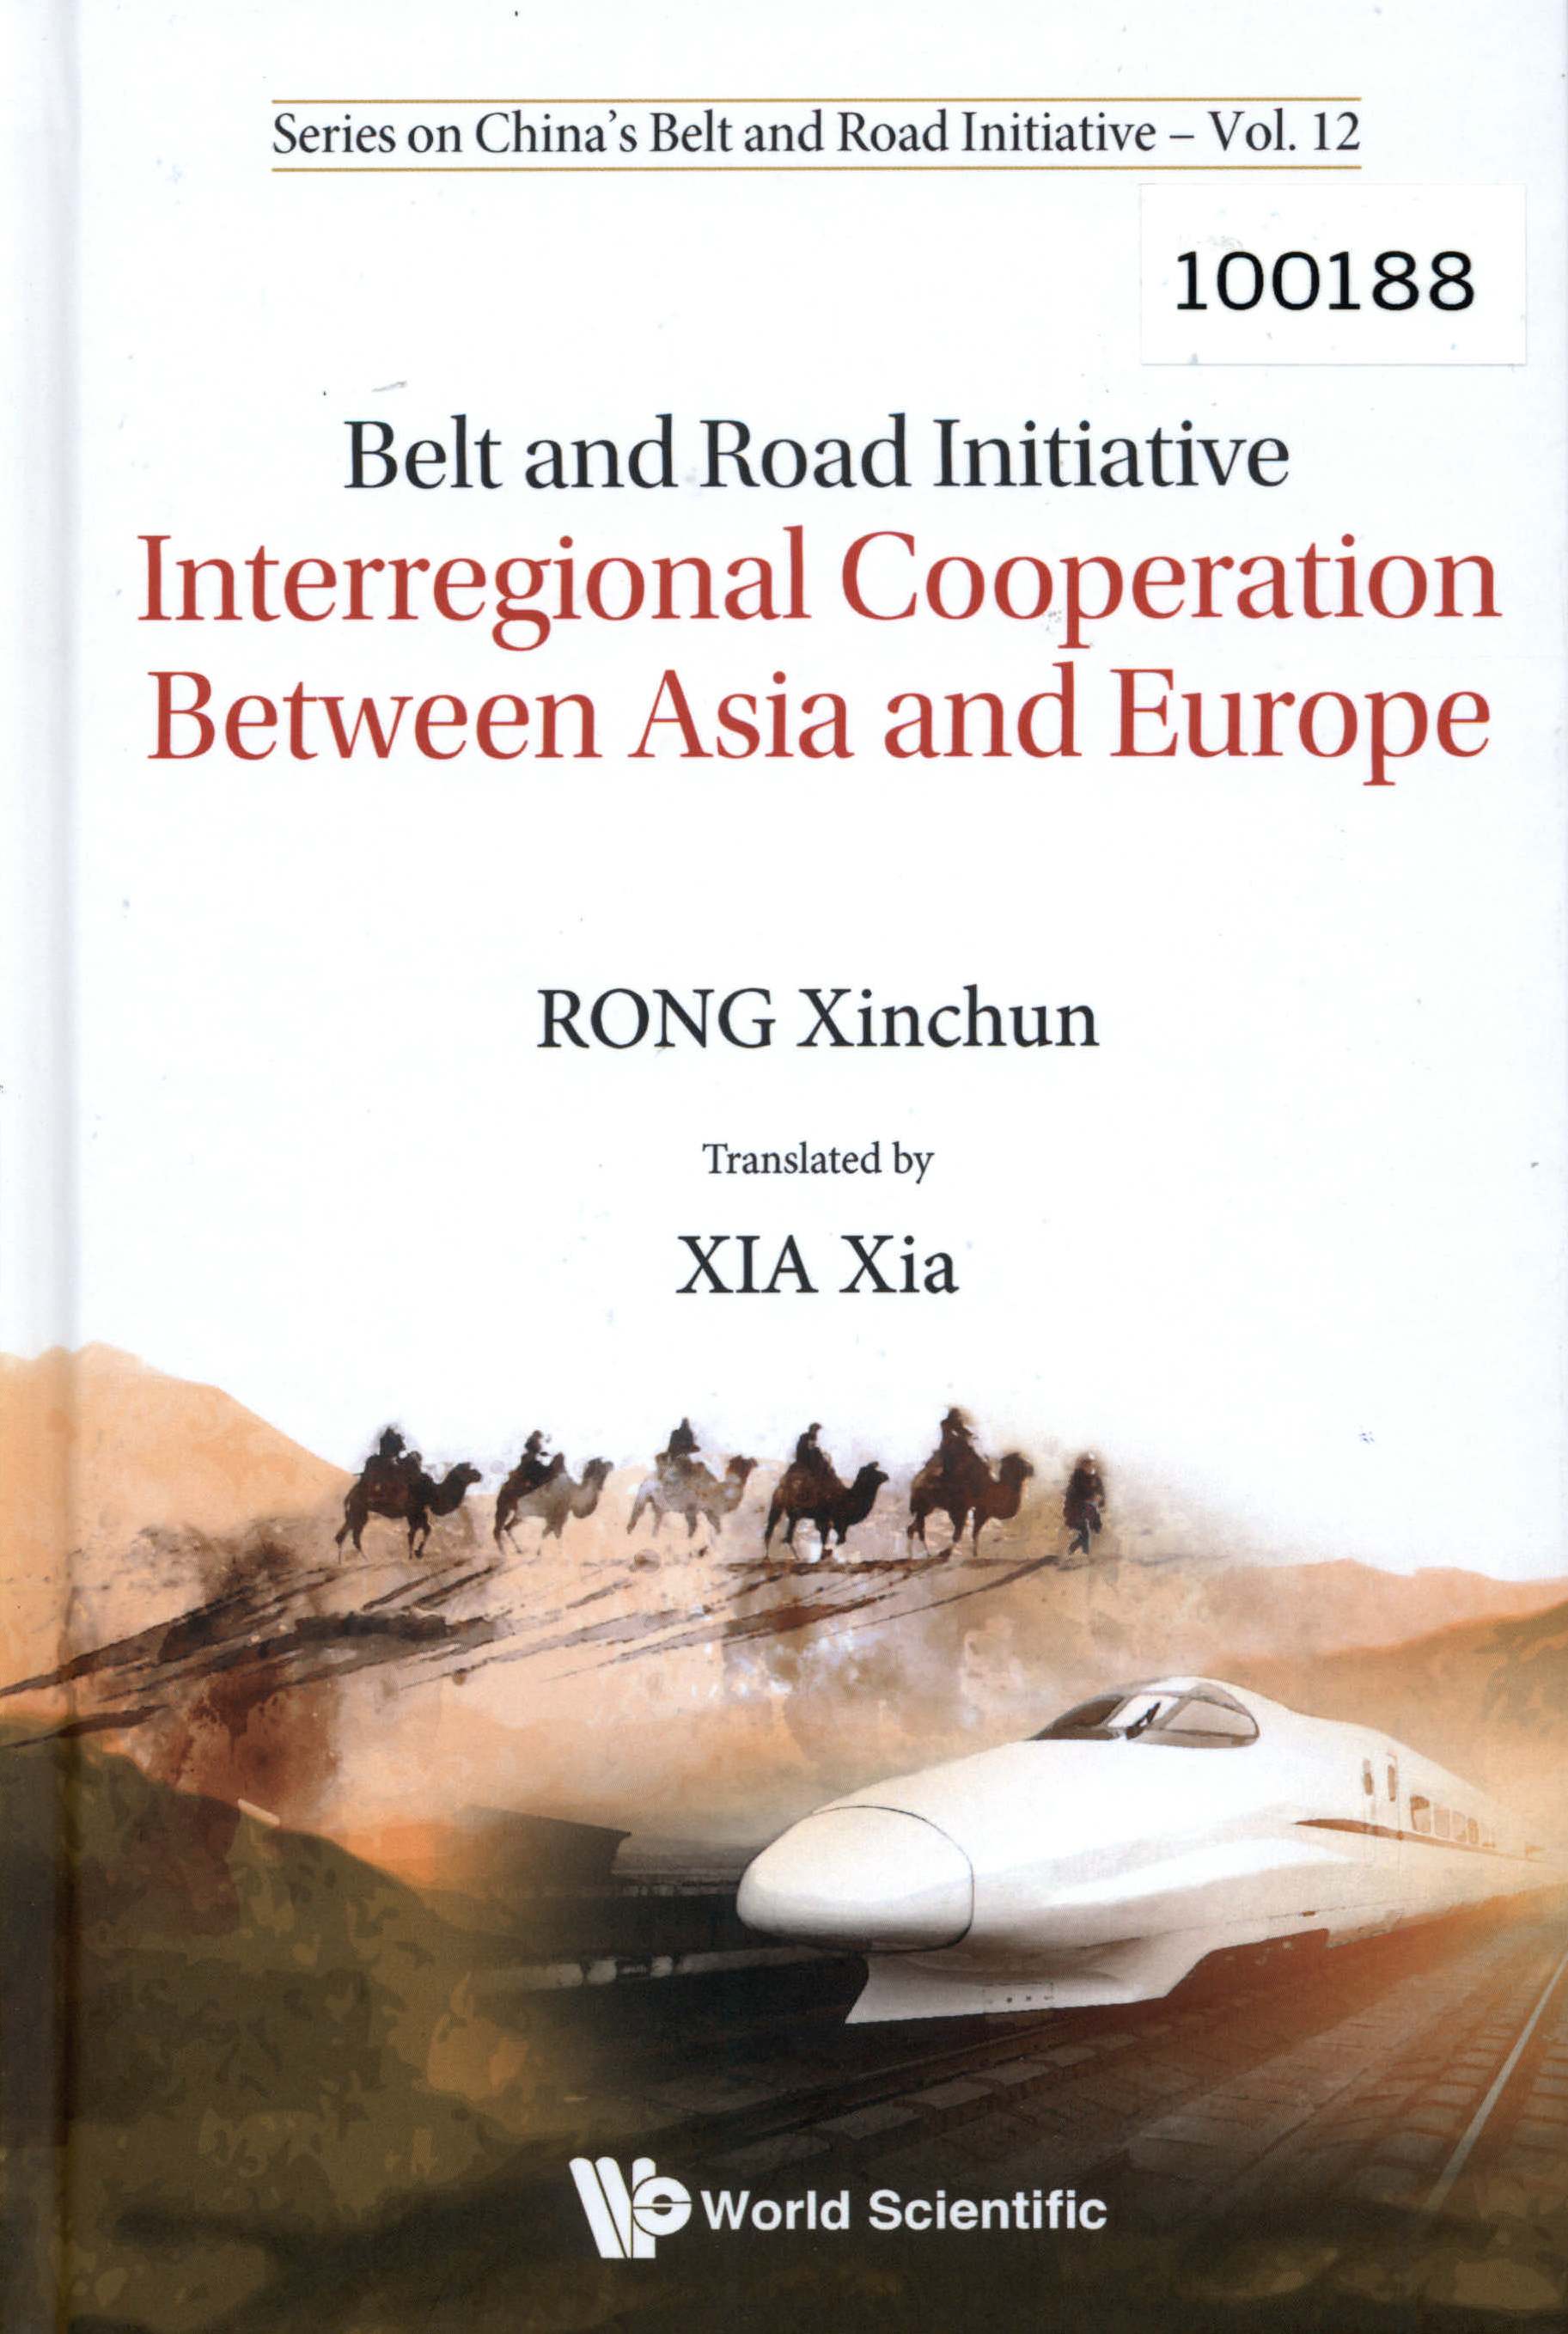 Belt and Road Initiative: Interregional Cooperation Between Asia and Europe